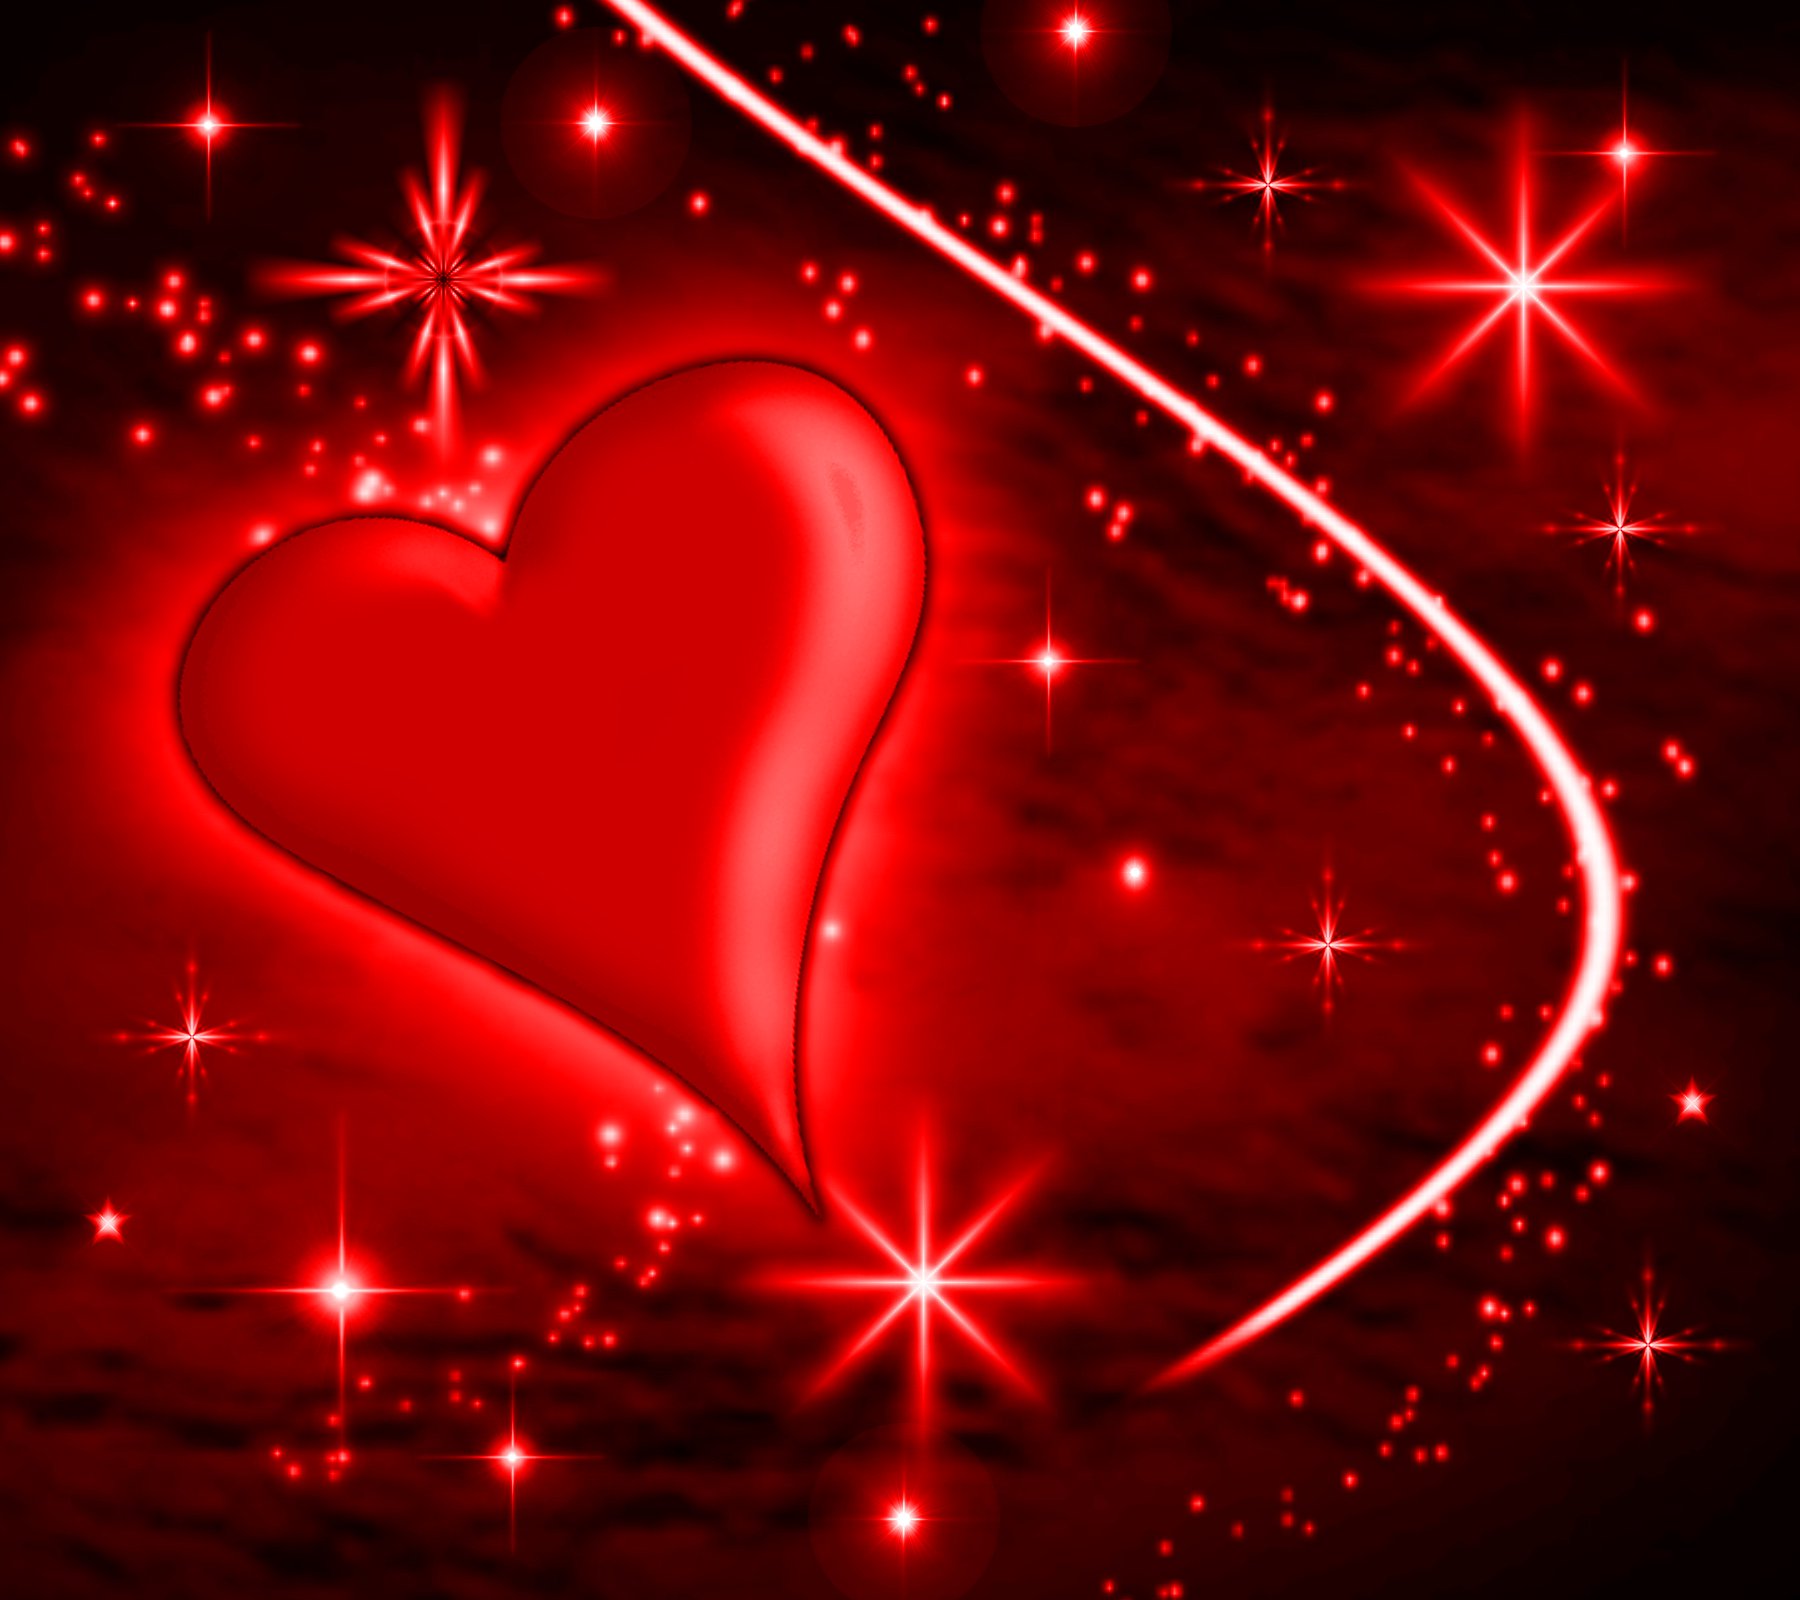 Red Hearts Wallpaper Background Image Amp Pictures Becuo